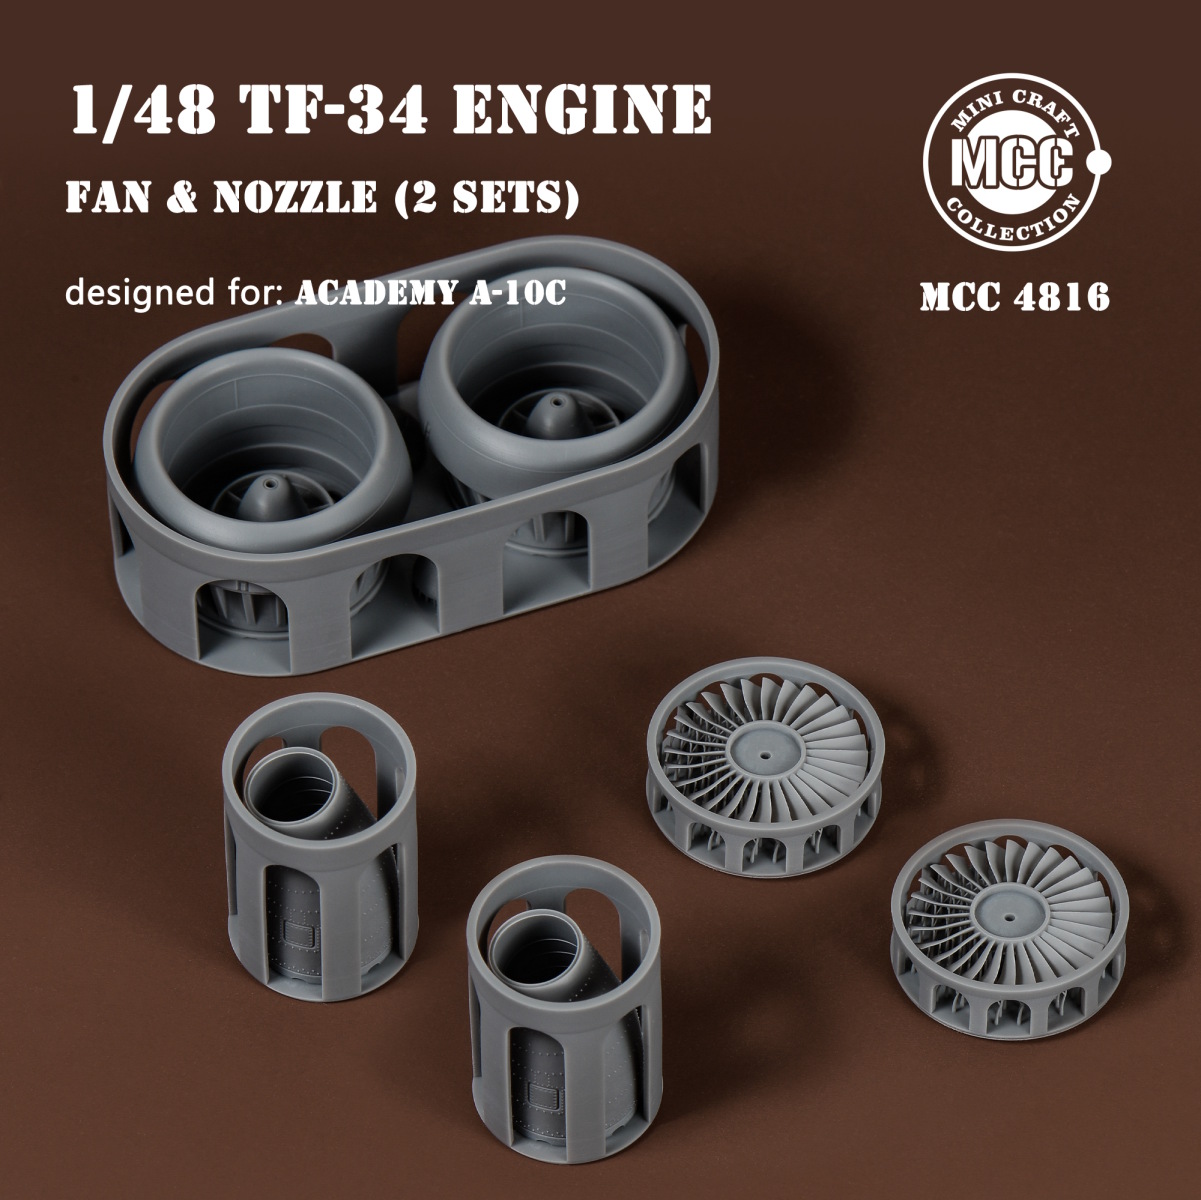 1/48 A-10C Thunderbolt II engine Fan blades and Nozzles for Academy